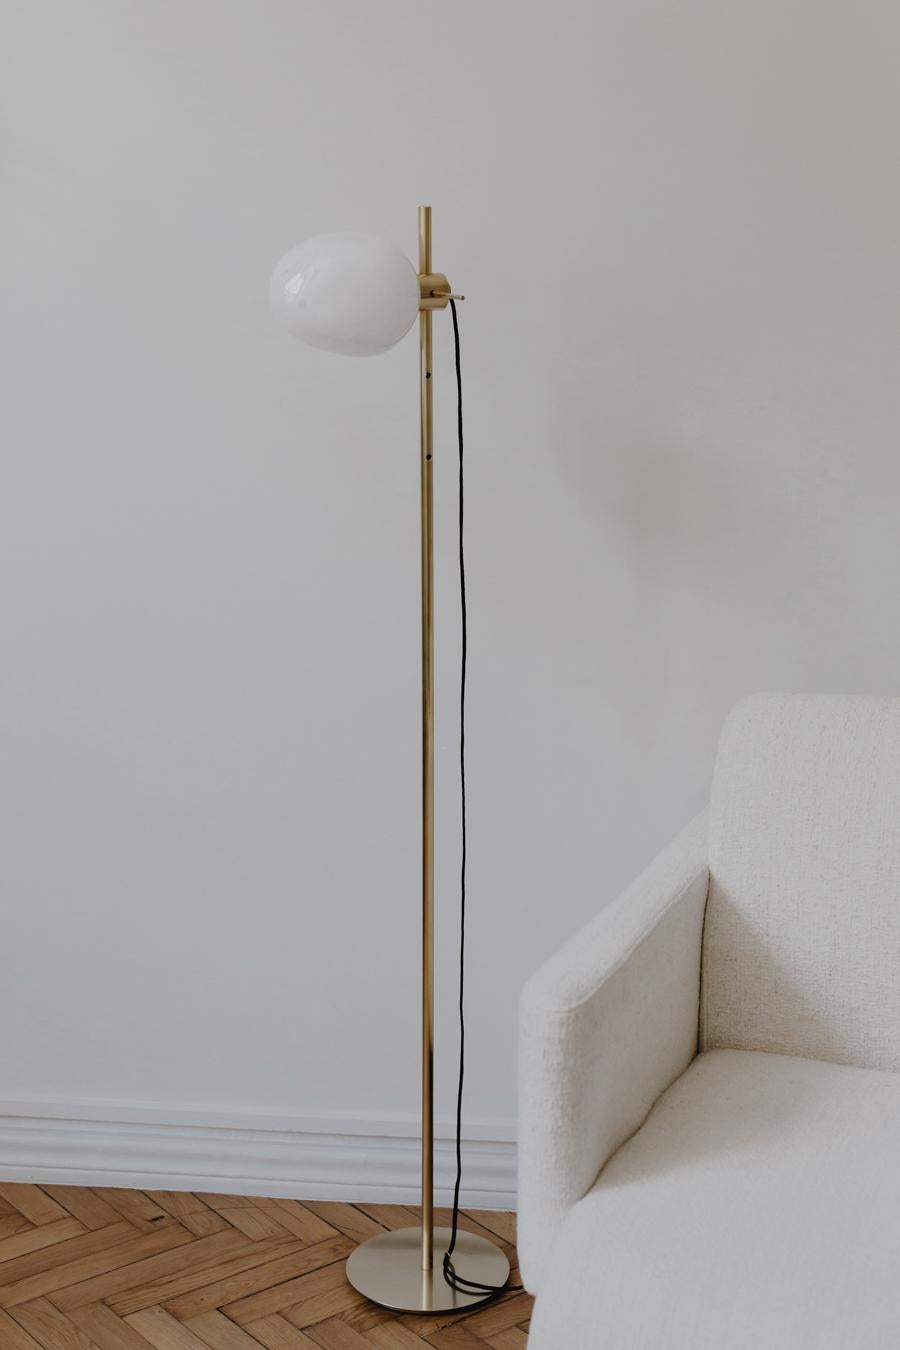 POLAR Floor Lamps embody melting visions of snowdrift covered Arctic ice afloat.
And stardust on its cosmic drift into the Vast Unknown.

This collection is designed in the style of Modern Minimalism.
It features coloured and hand shaped mouth-blown